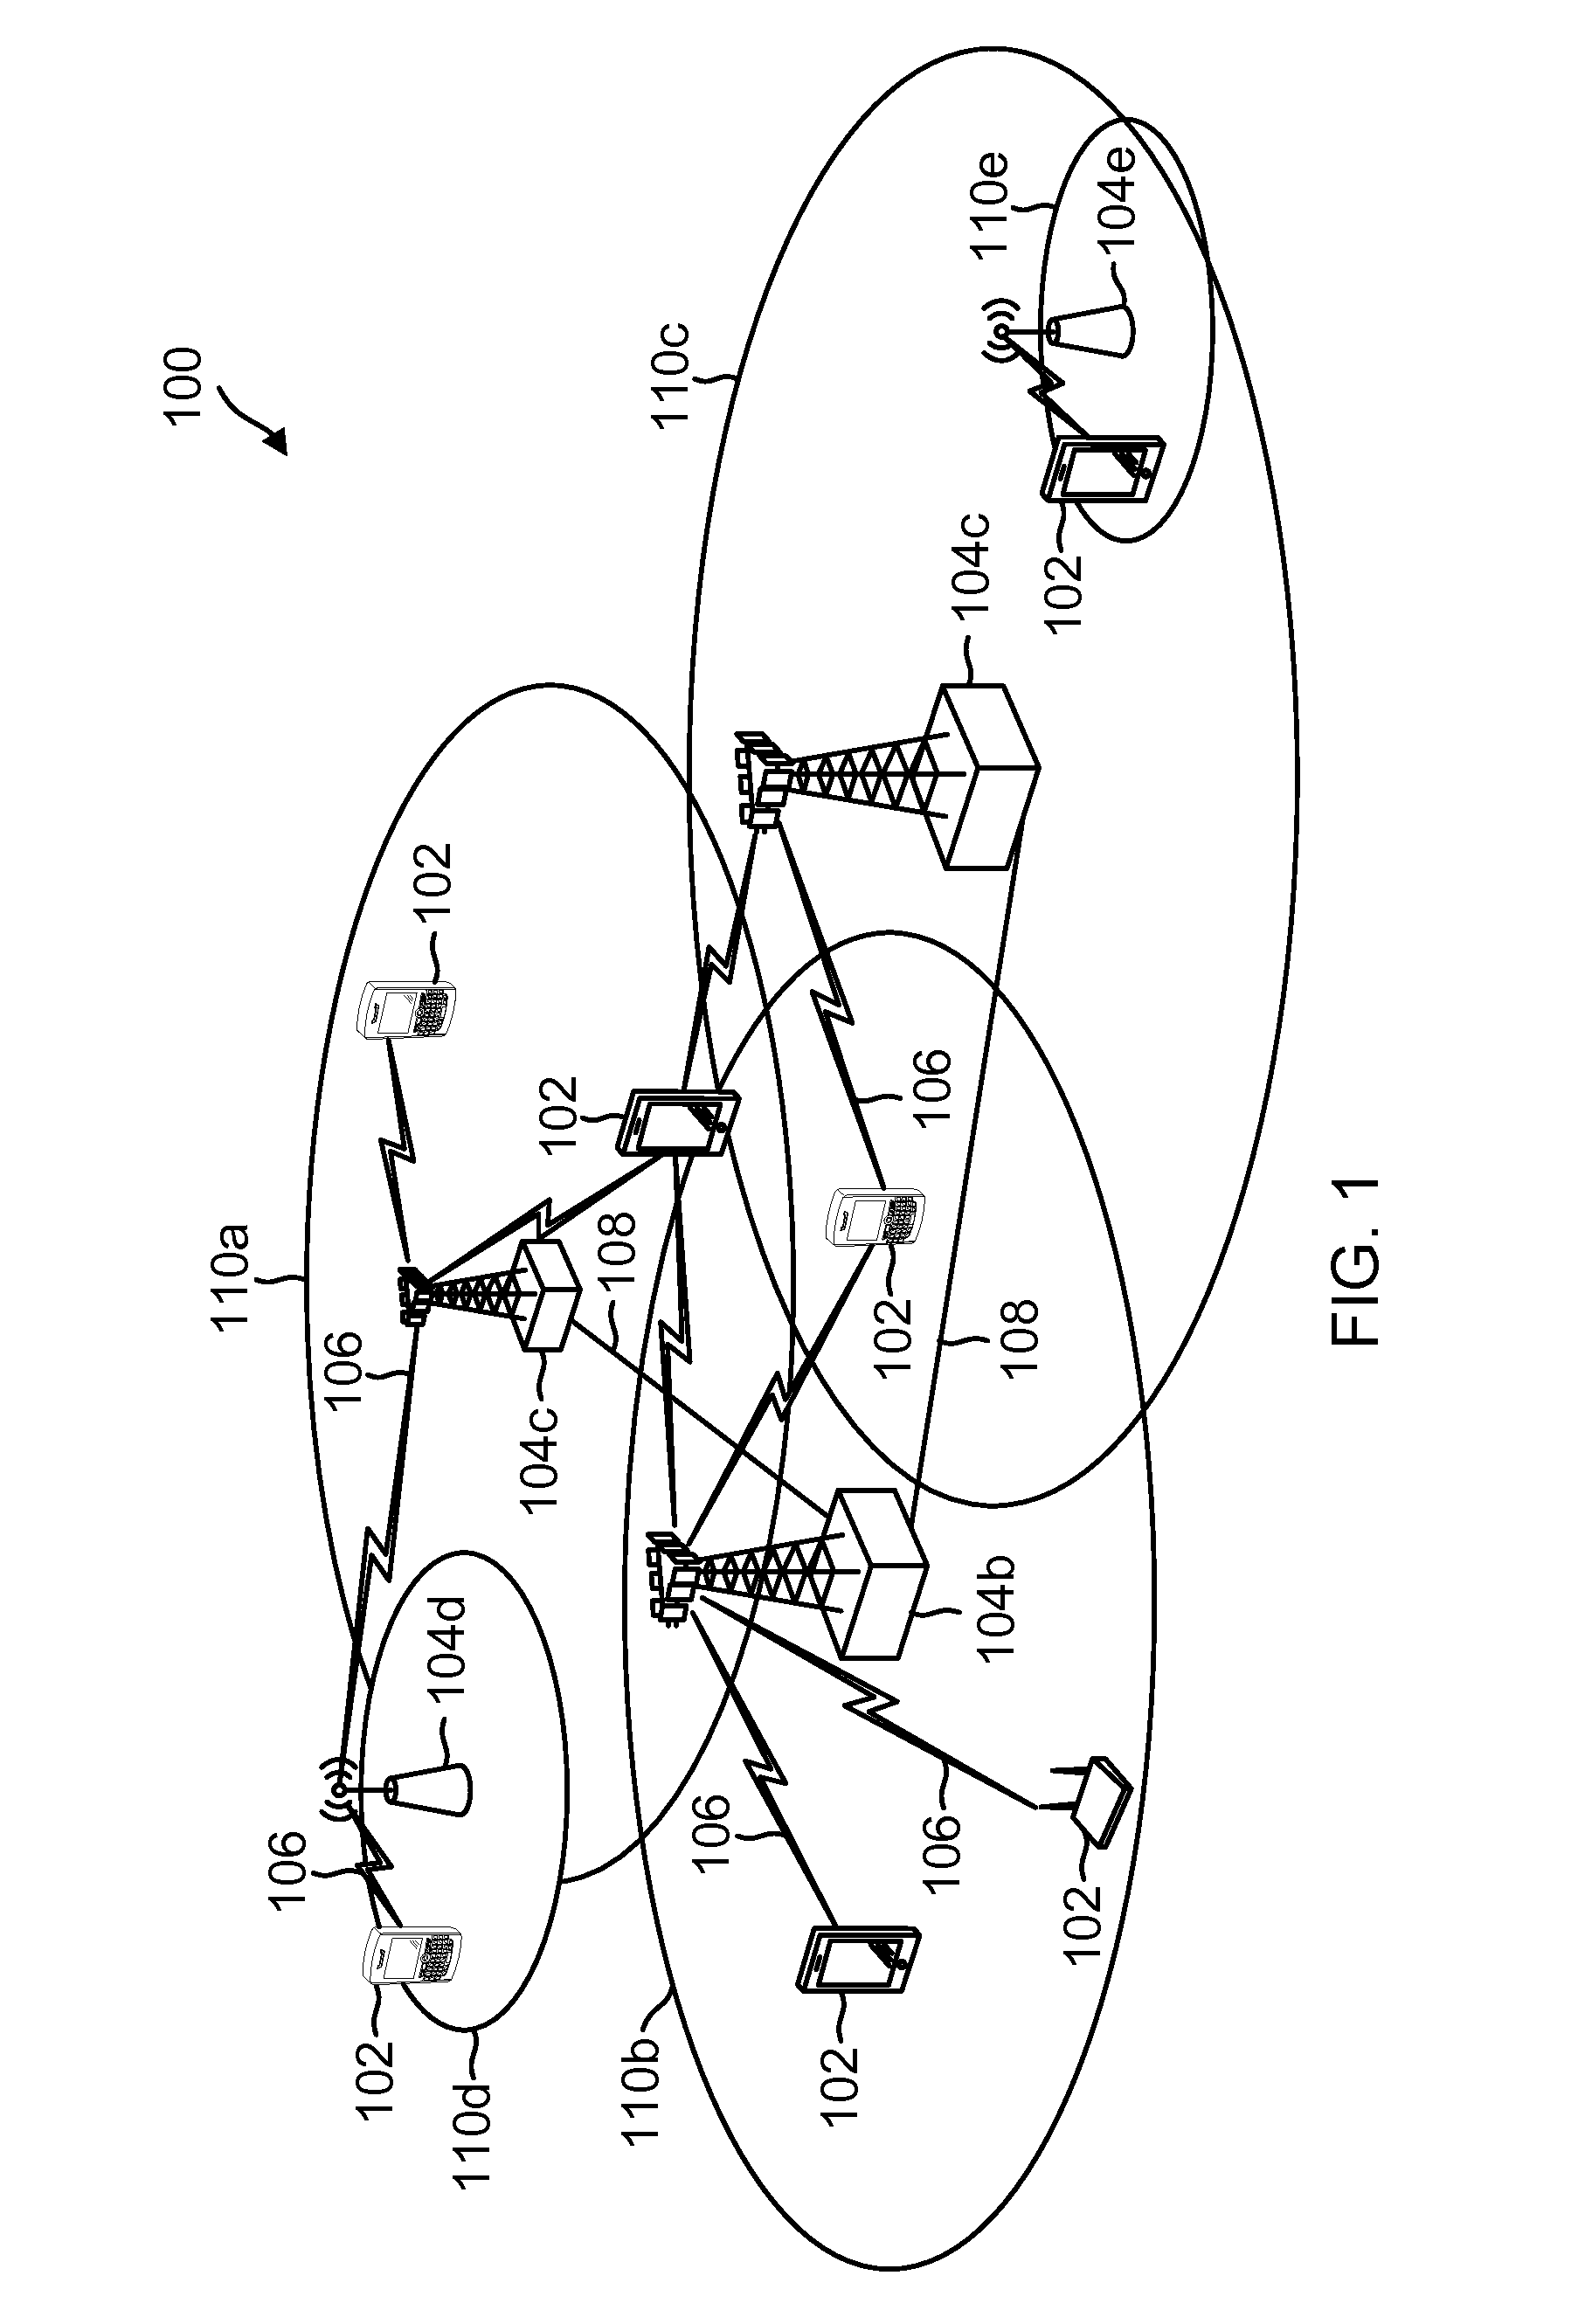 Reciprocal channel sounding reference signal multiplexing